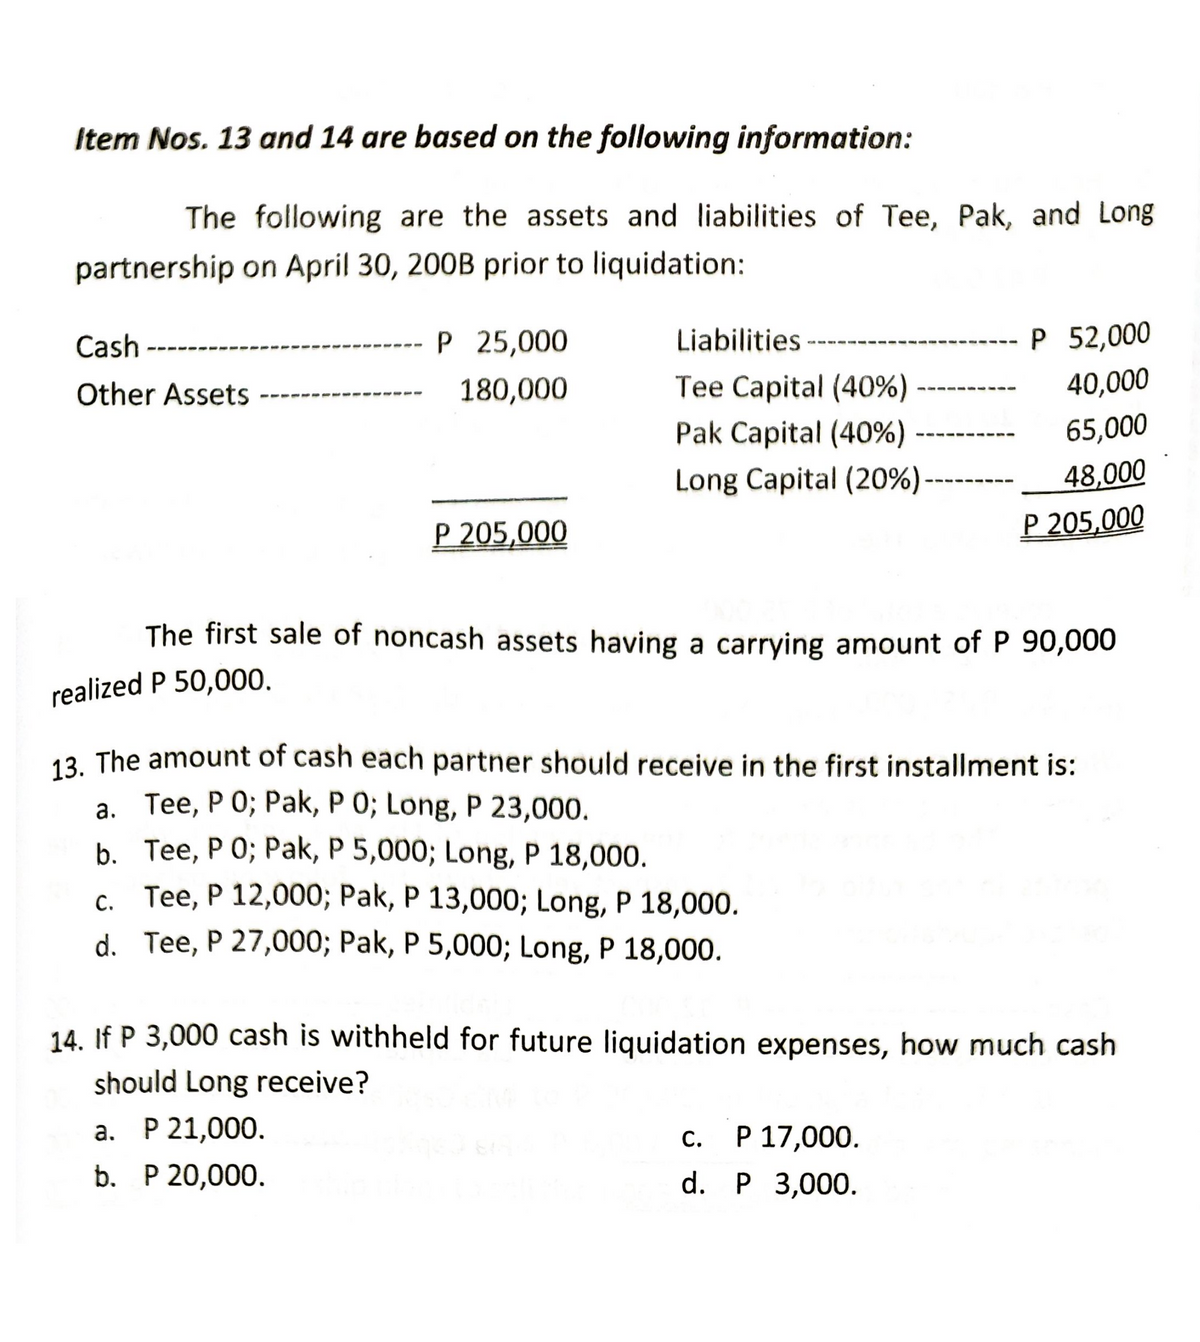 Item Nos. 13 and 14 are based on the following information:
The following are the assets and liabilities of Tee, Pak, and Long
partnership on April 30, 200B prior to liquidation:
Cash
P 25,000
Liabilities.
P 52,000
Other Assets
180,000
40,000
Tee Capital (40%)
Pak Capital (40%)
65,000
Long Capital (20%)
48,000
P 205,000
P 205,000
The first sale of noncash assets having a carrying amount of P 90,000
realized P 50,000.
13. The amount of cash each partner should receive in the first installment is:
a. Tee, P 0; Pak, P 0; Long, P 23,000.
b. Tee, P O; Pak, P 5,000; Long, P 18,000.
c. Tee, P 12,000; Pak, P 13,000; Long, P 18,000.
C.
d. Tee, P 27,000; Pak, P 5,000; Long, P 18,000.
14. If P 3,000 cash is withheld for future liquidation expenses, how much cash
should Long receive?
a. P 21,000.
c.
P 17,000.
b. P 20,000.
d. P 3,000.